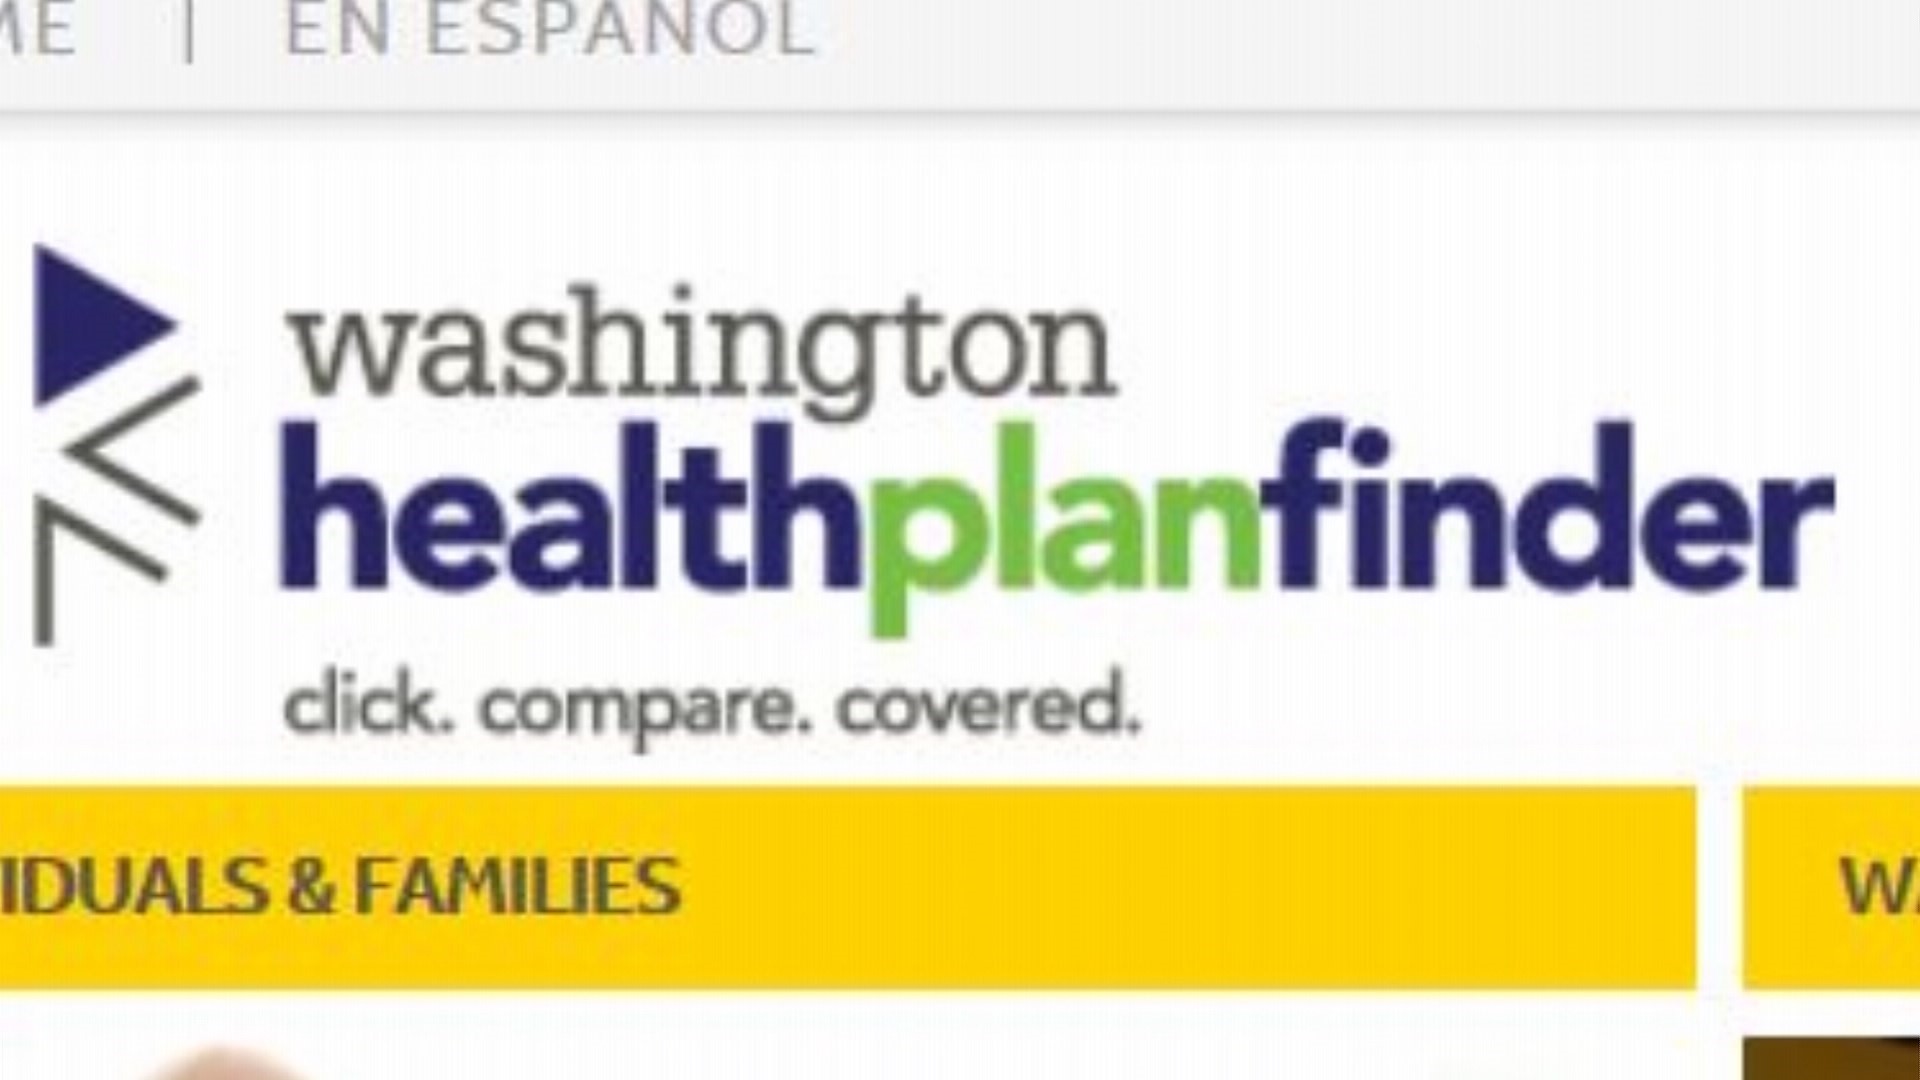 Washington has become the first state to open its health insurance marketplace to all residents regardless of immigration status. The enrollment period is underway.